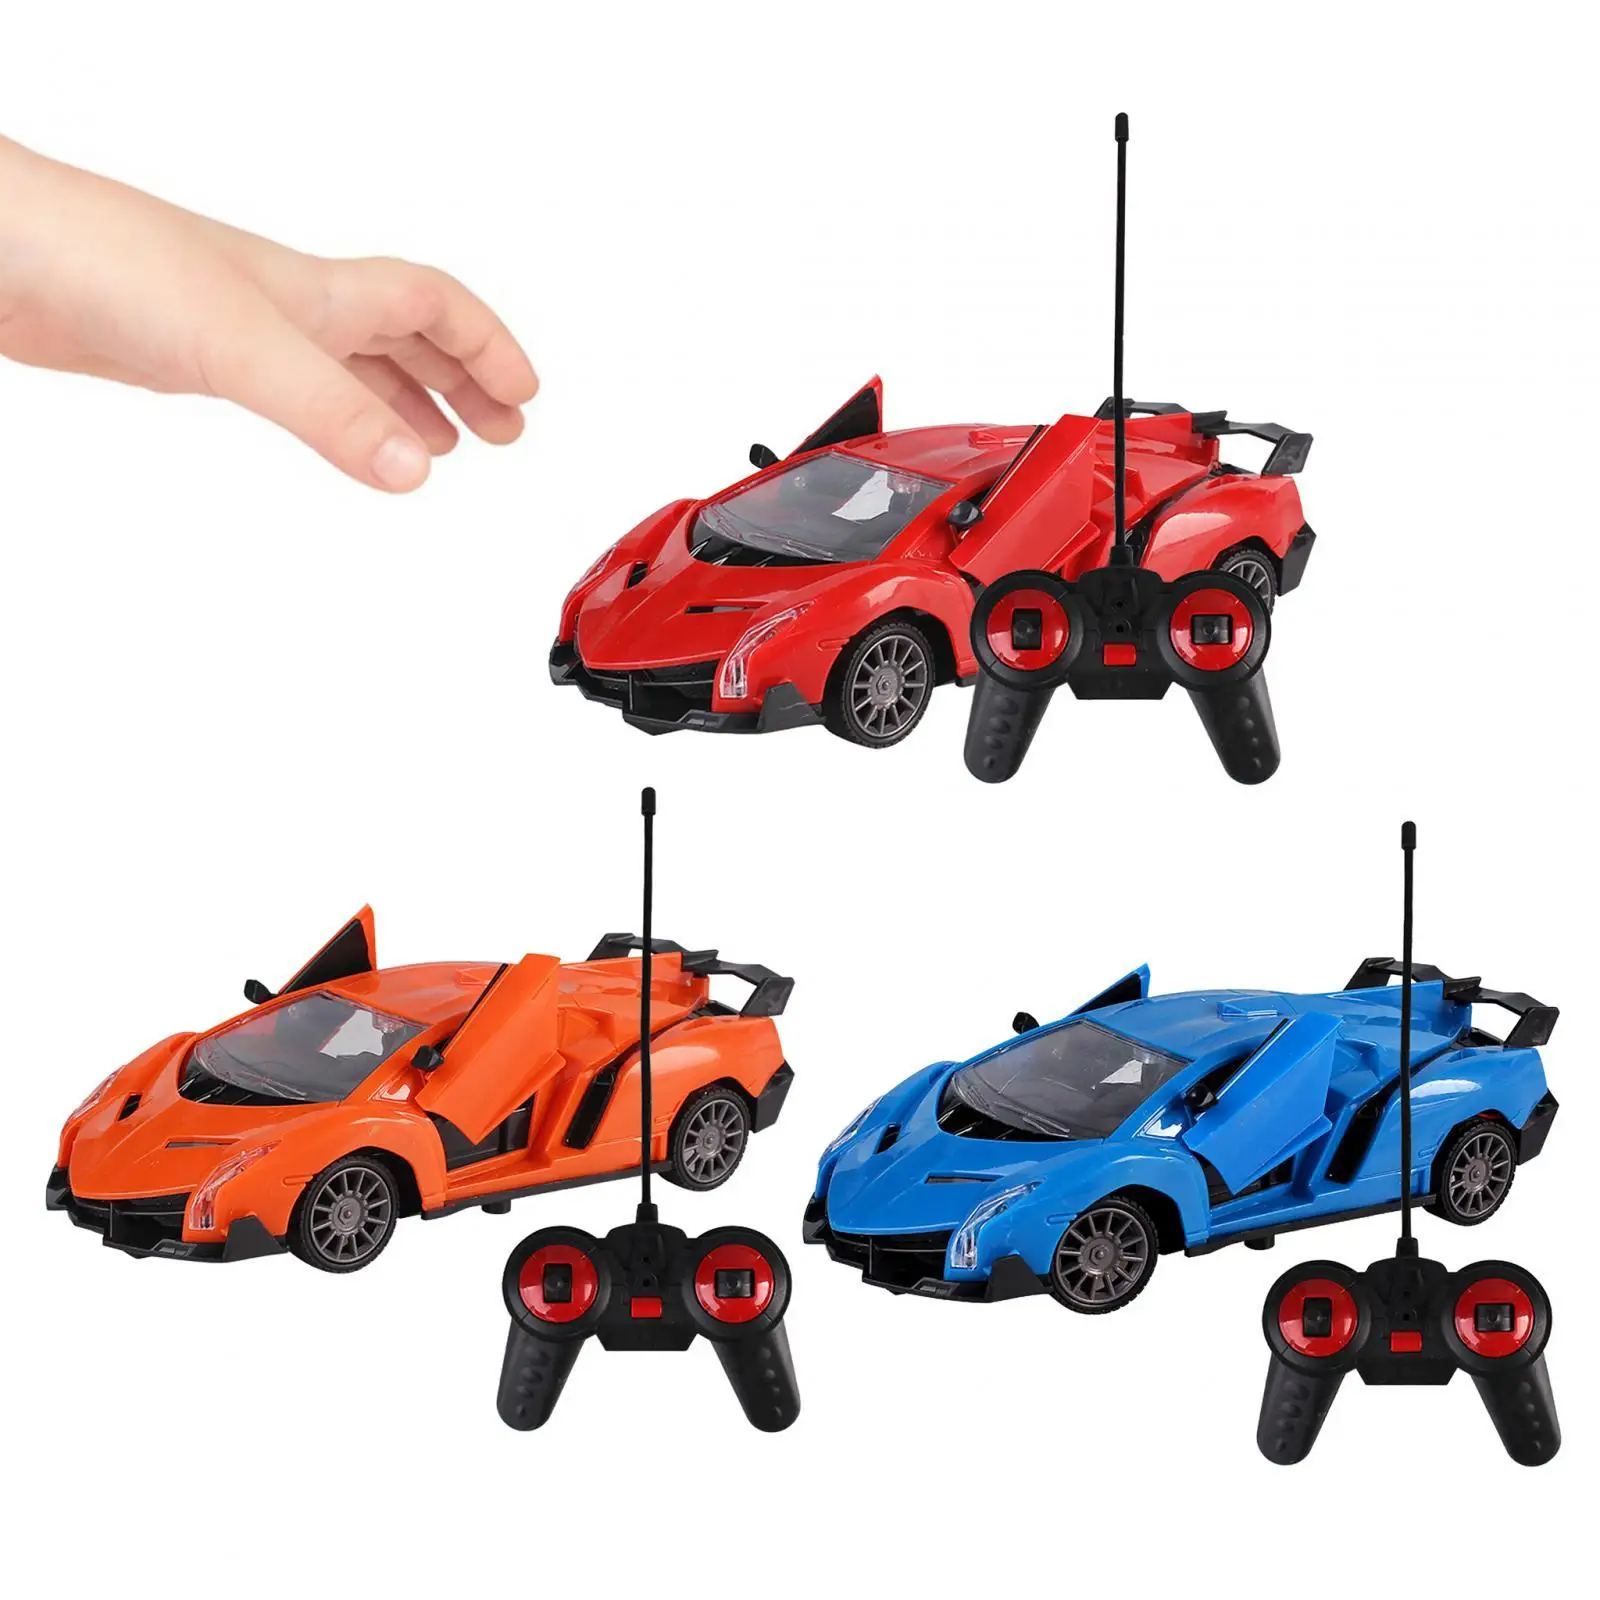 1/24 Remote Control Car Toy sport Hobby Toy for Parks Indoor Streets